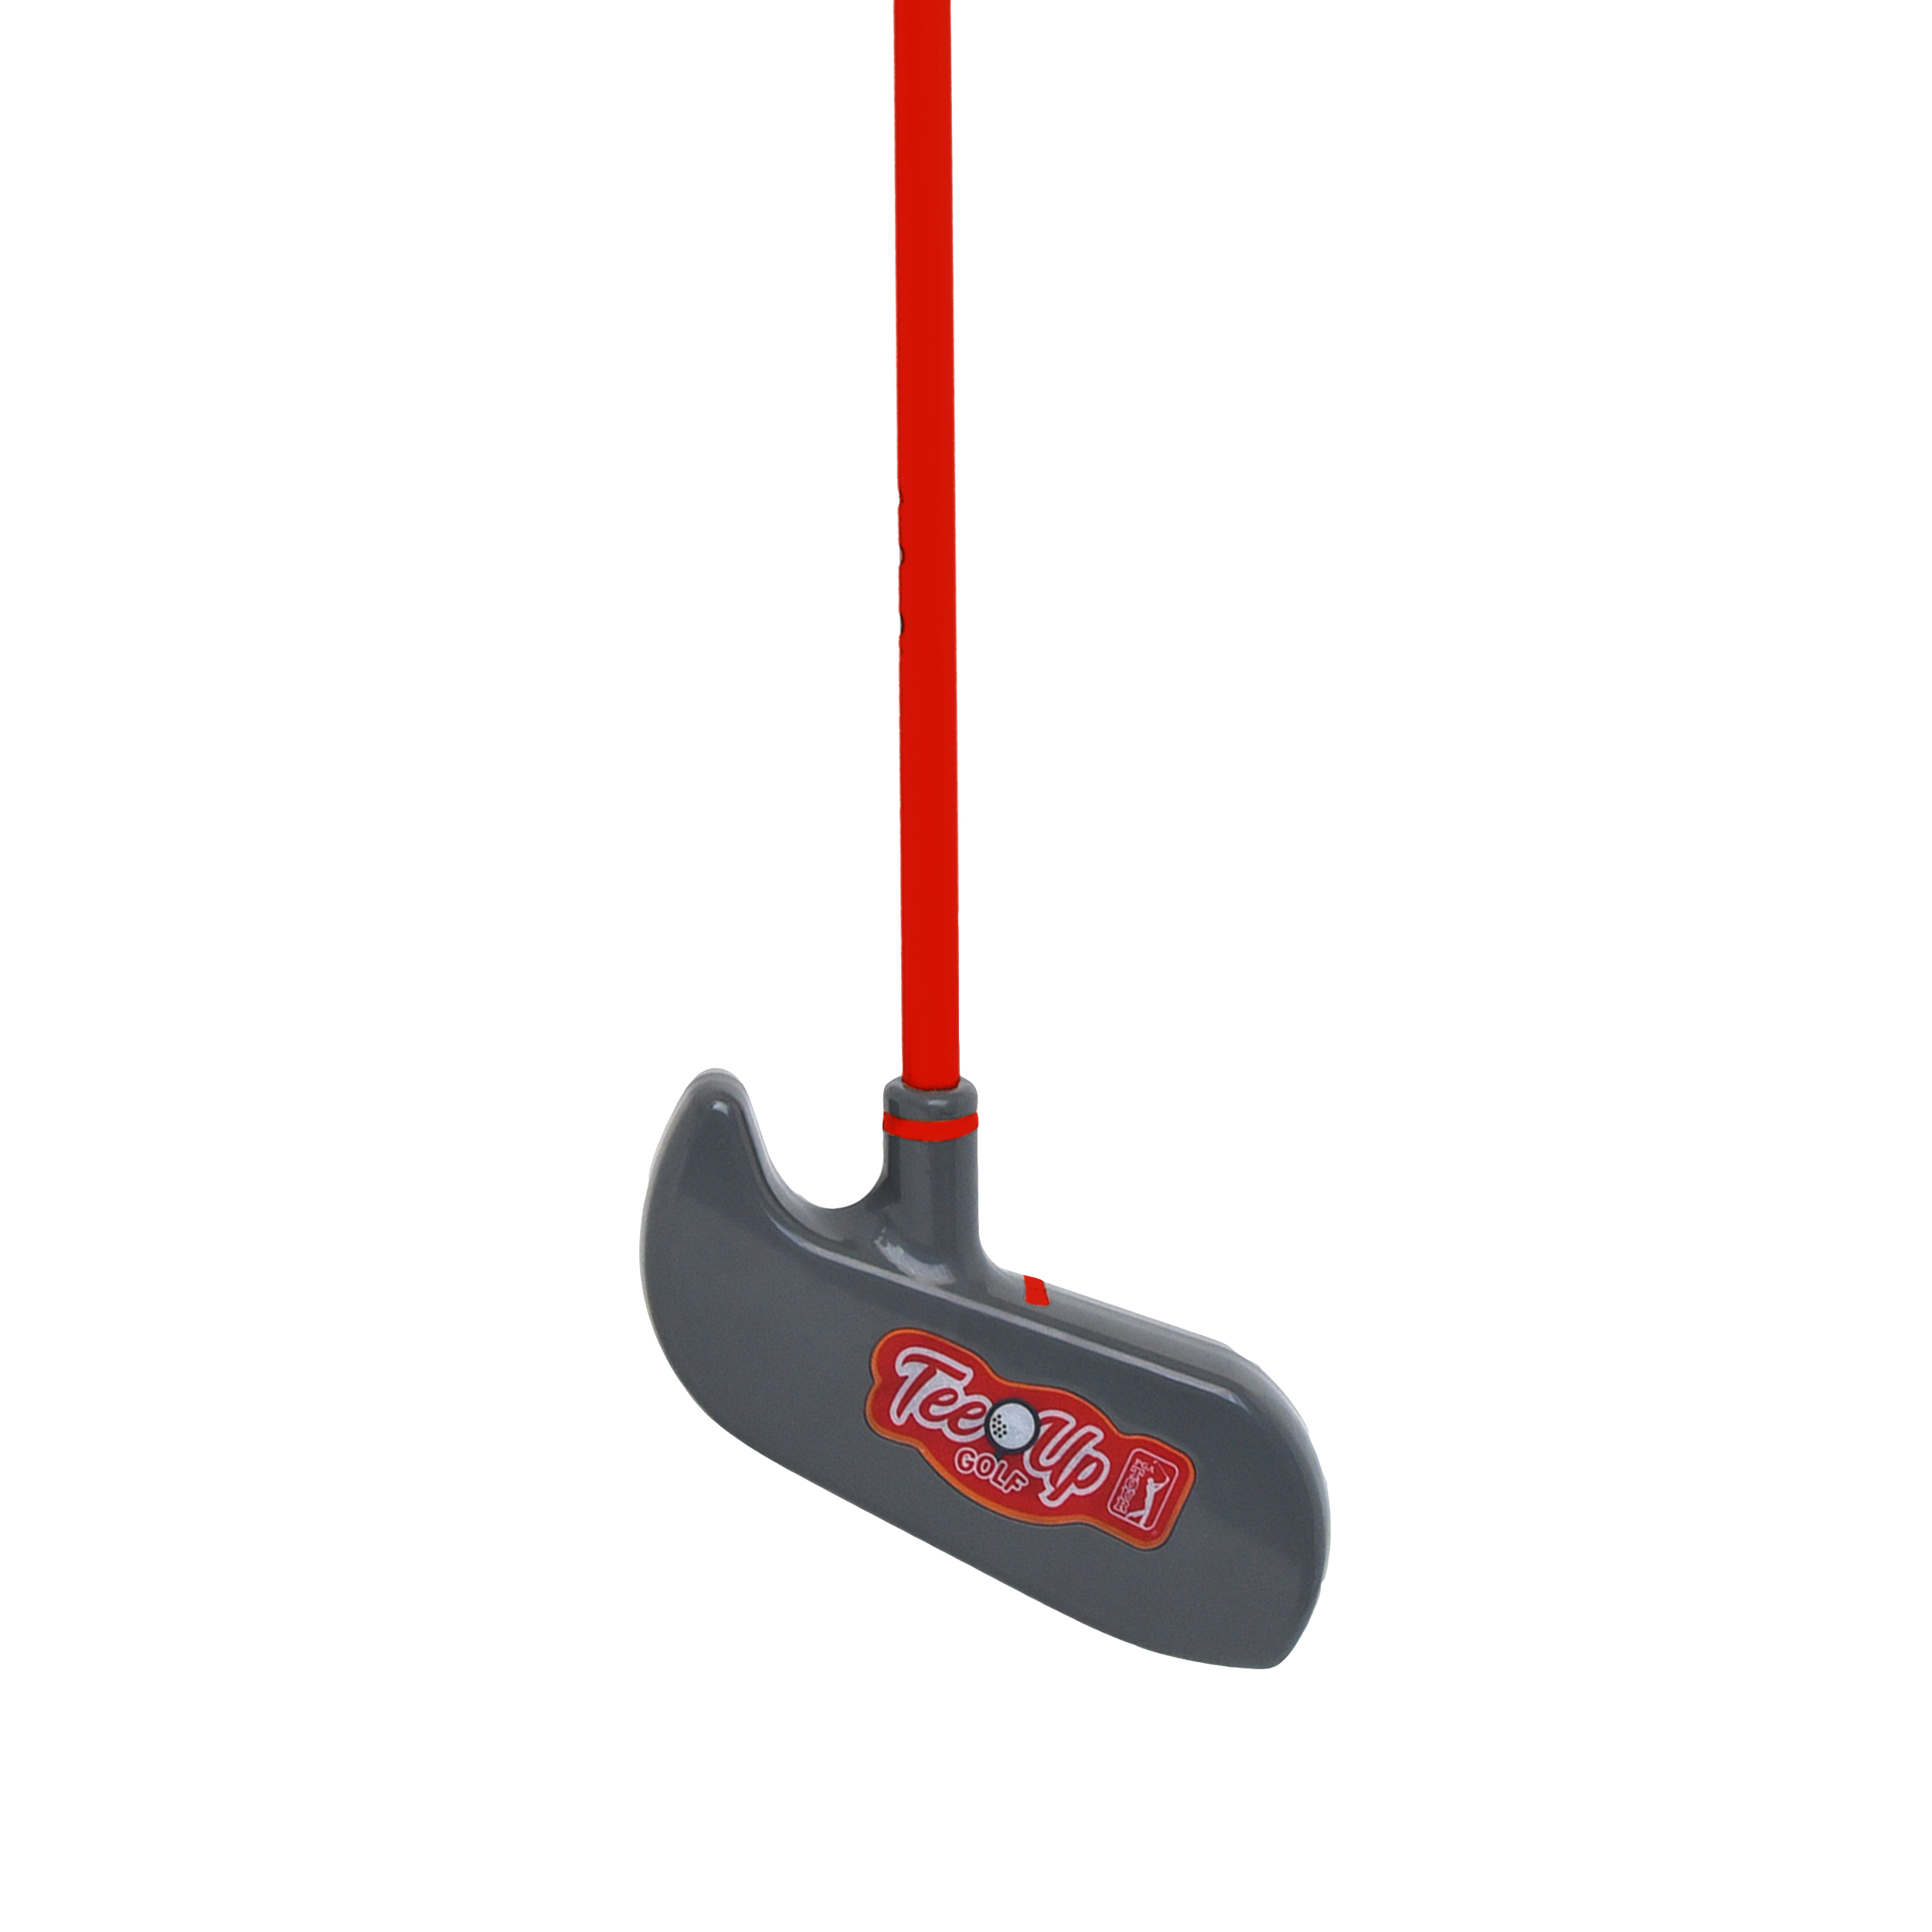 PGA Tour Tee-Up Kids Putter Golf Club, Small, Right Handed Dexterity - image 3 of 7